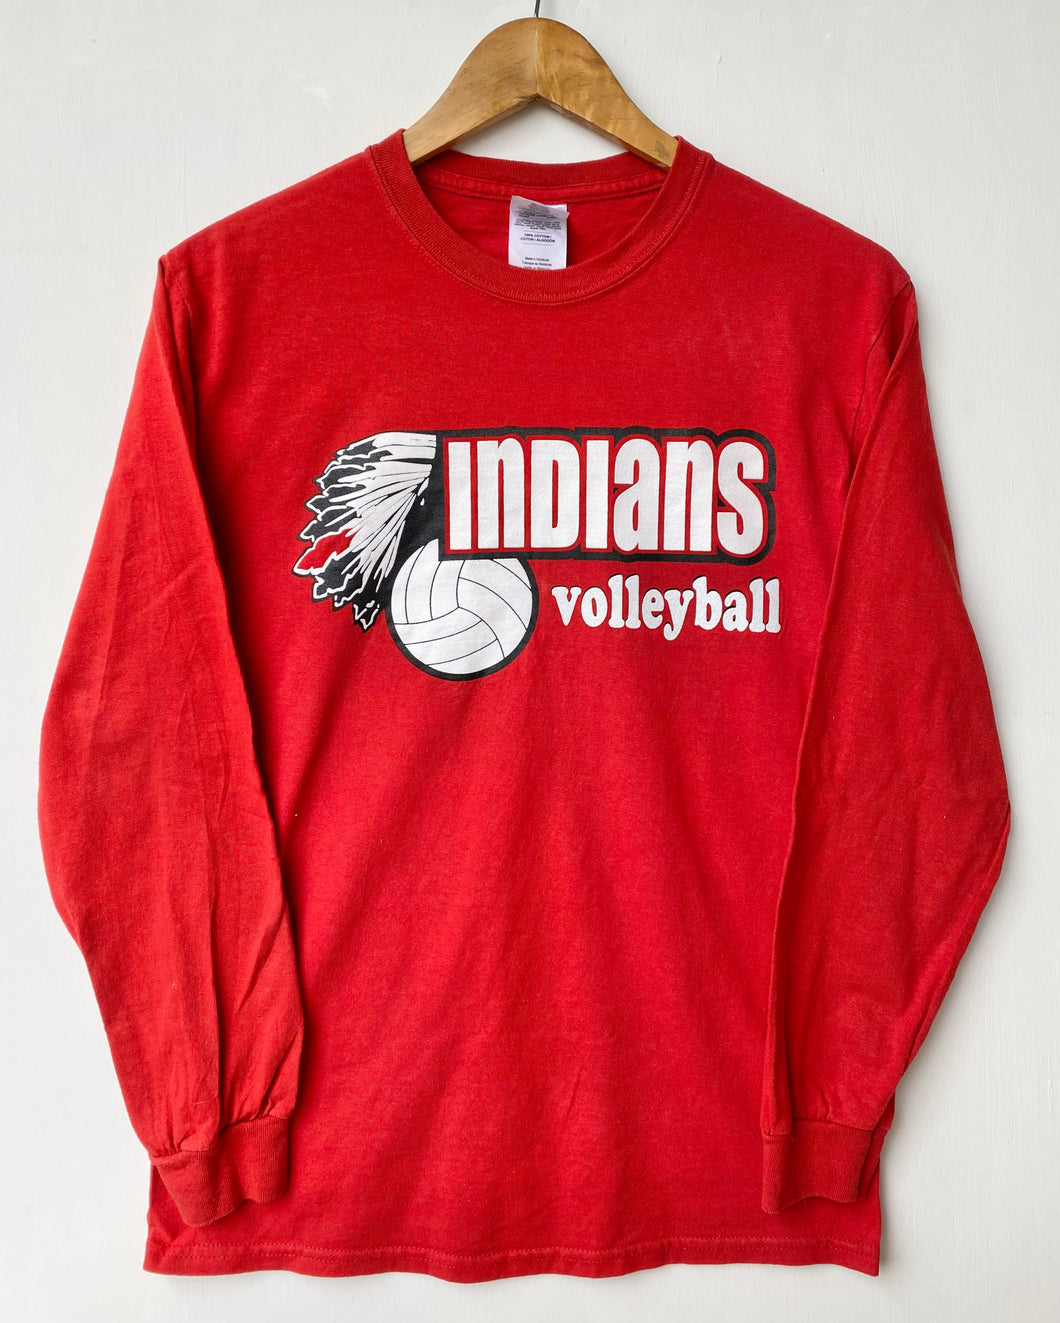 Printed ‘Indians Volleyball’ t-shirt (S)